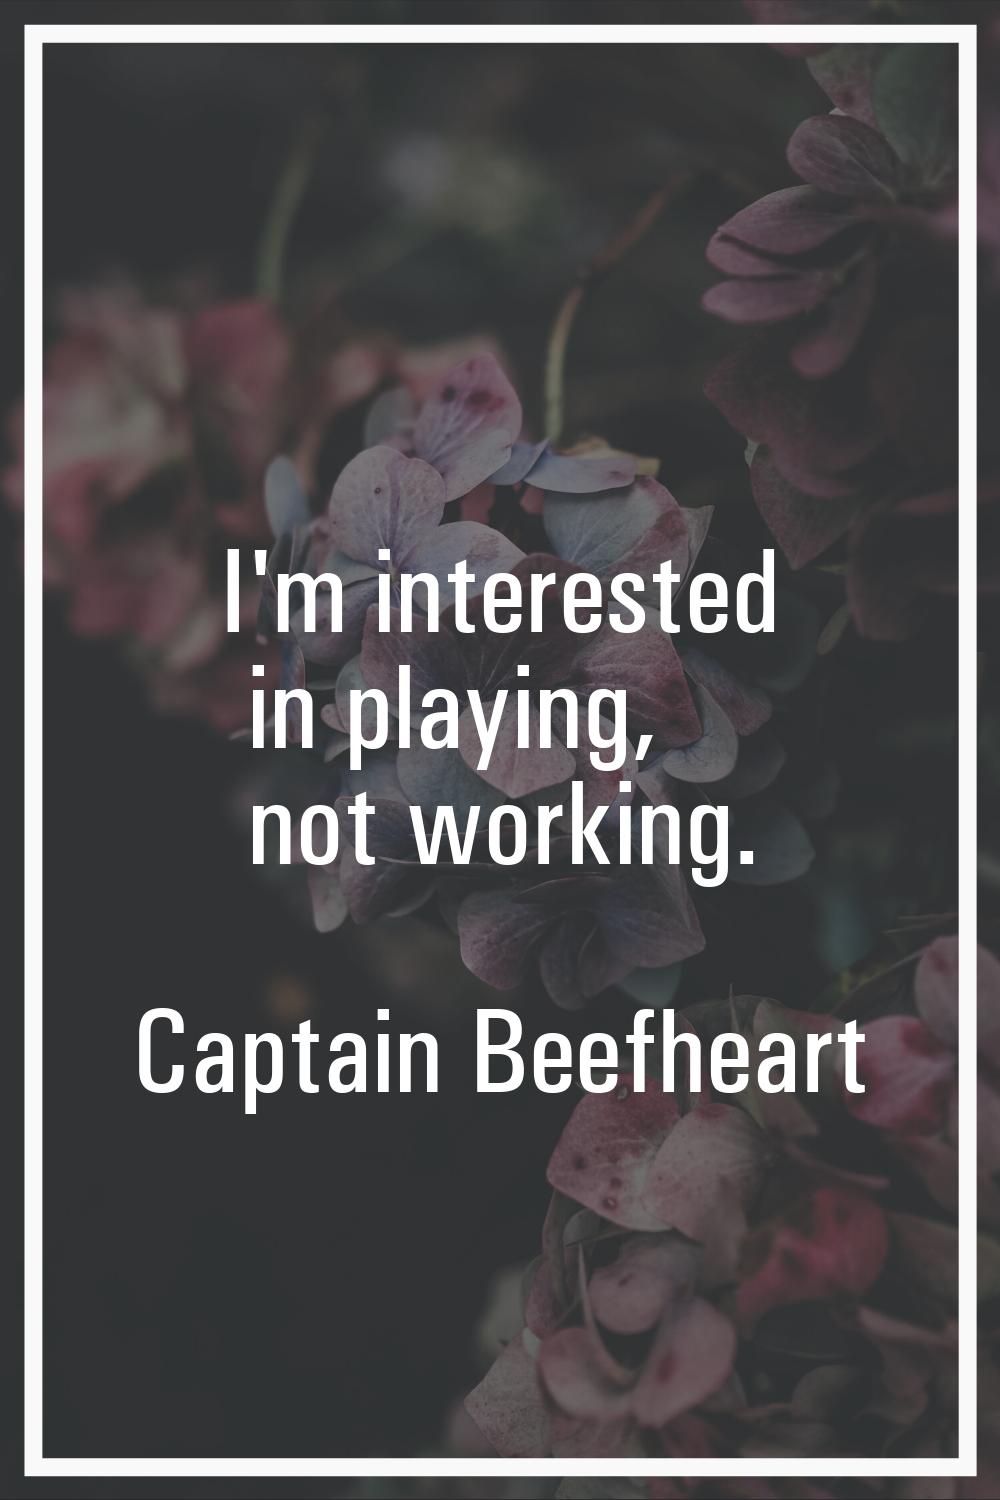 I'm interested in playing, not working.